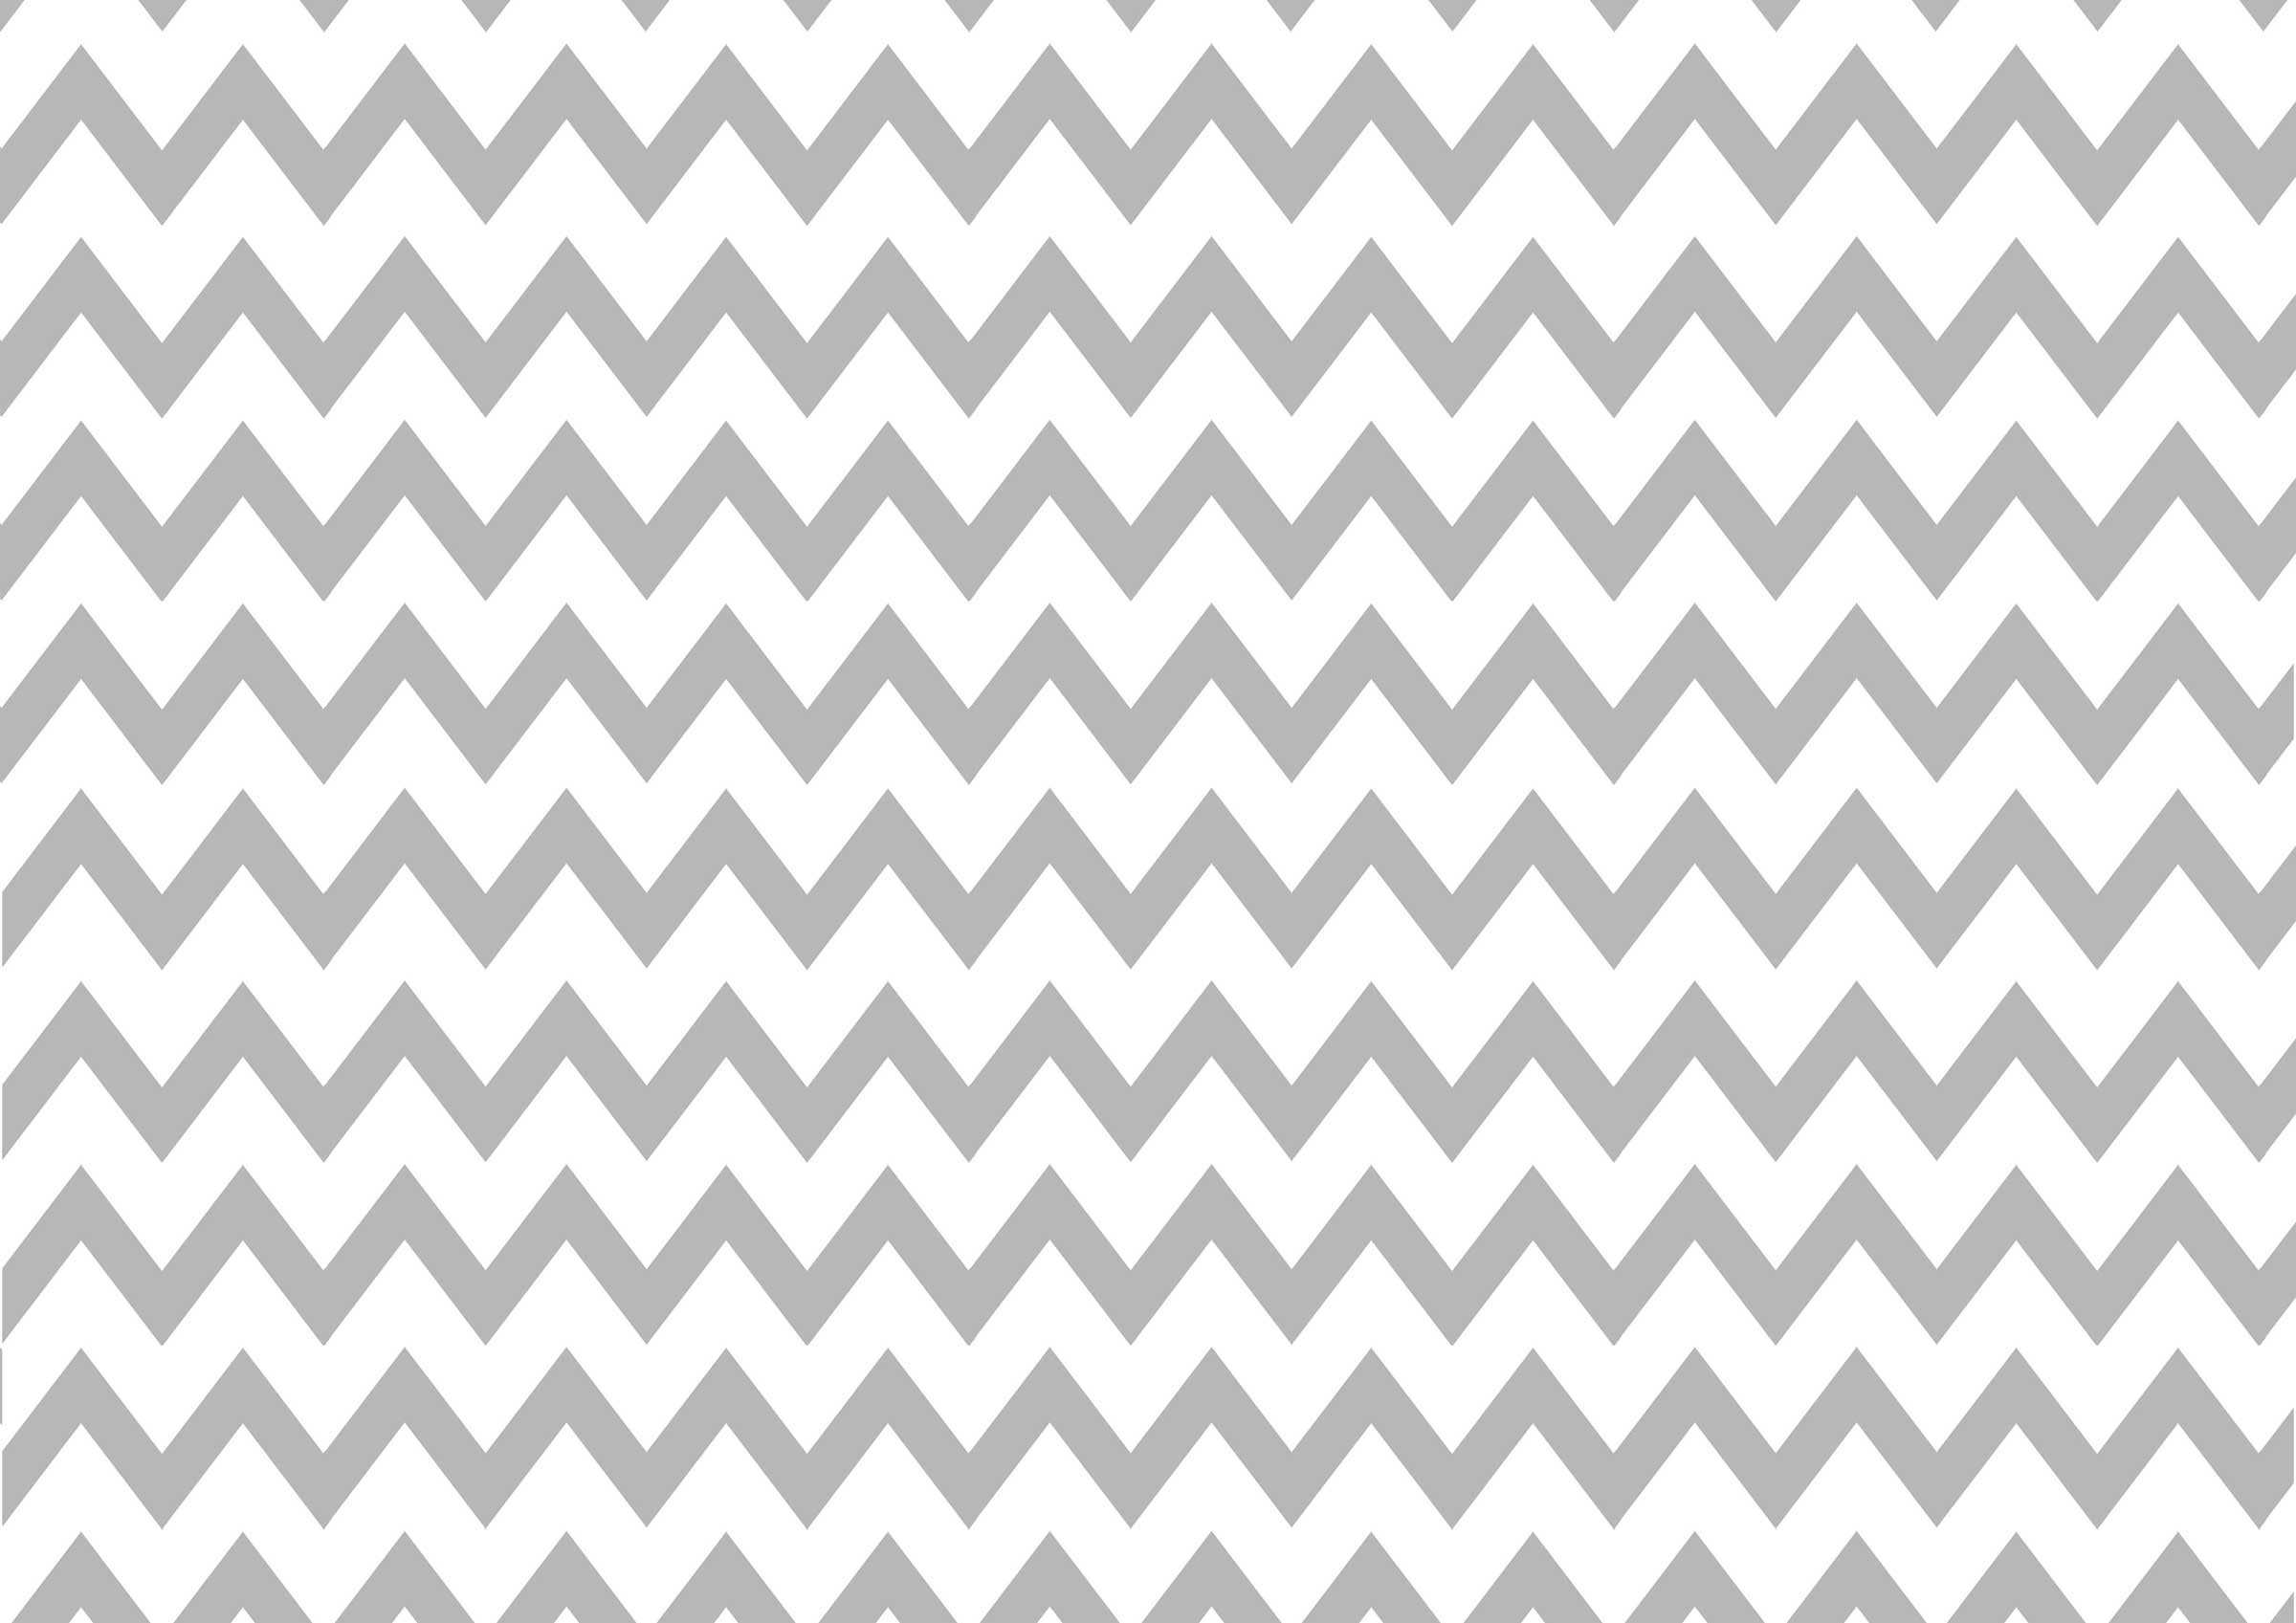 2400x1697 ... Home Design : Teal And Gray Chevron Pattern Industrial Medium The  Incredible in addition to Attractive ...